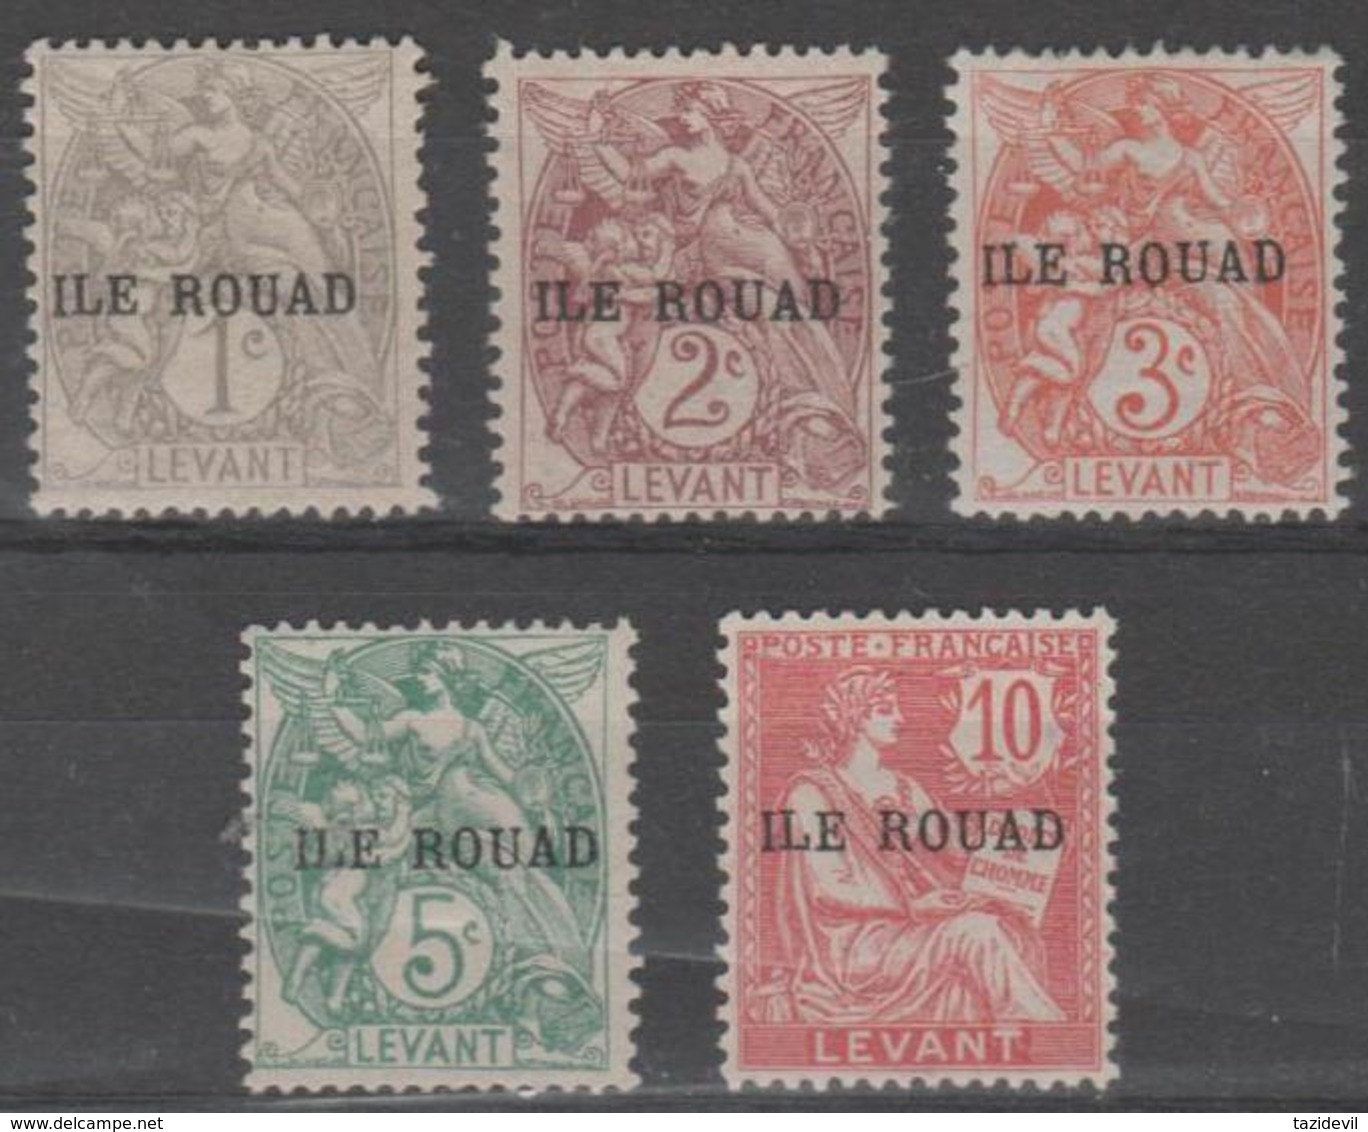 RUOAD - First Five From 1916 Set. Scott 4-8. Mint * - Unused Stamps